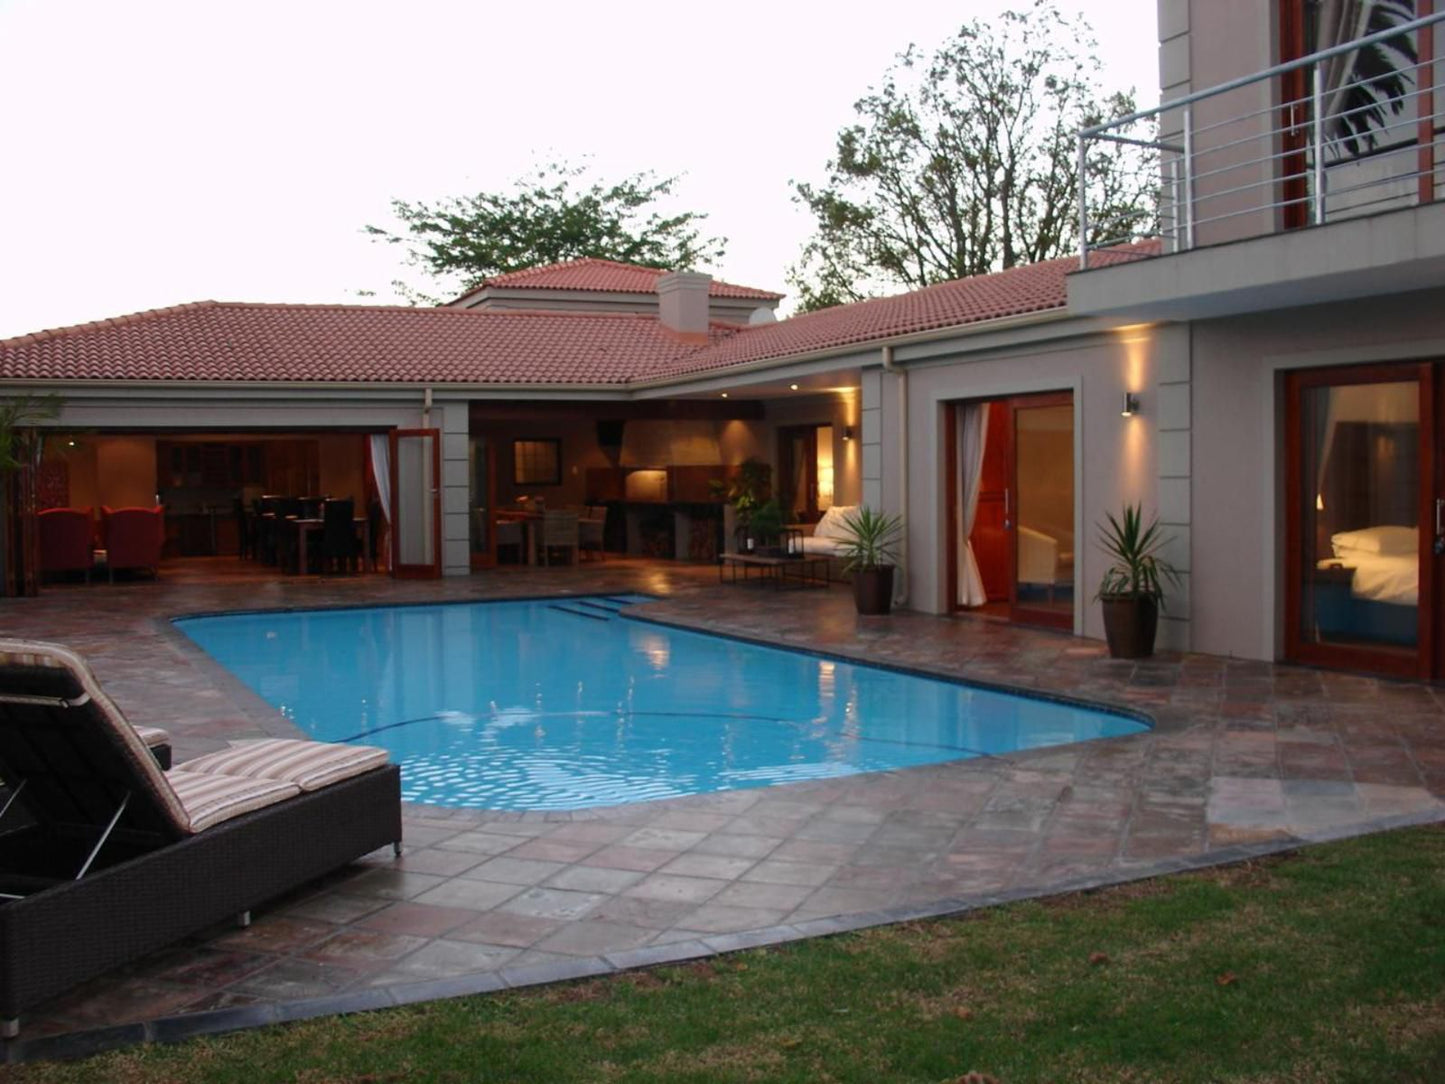 Lord Caledon The Guest House Camphers Drift George Western Cape South Africa House, Building, Architecture, Swimming Pool